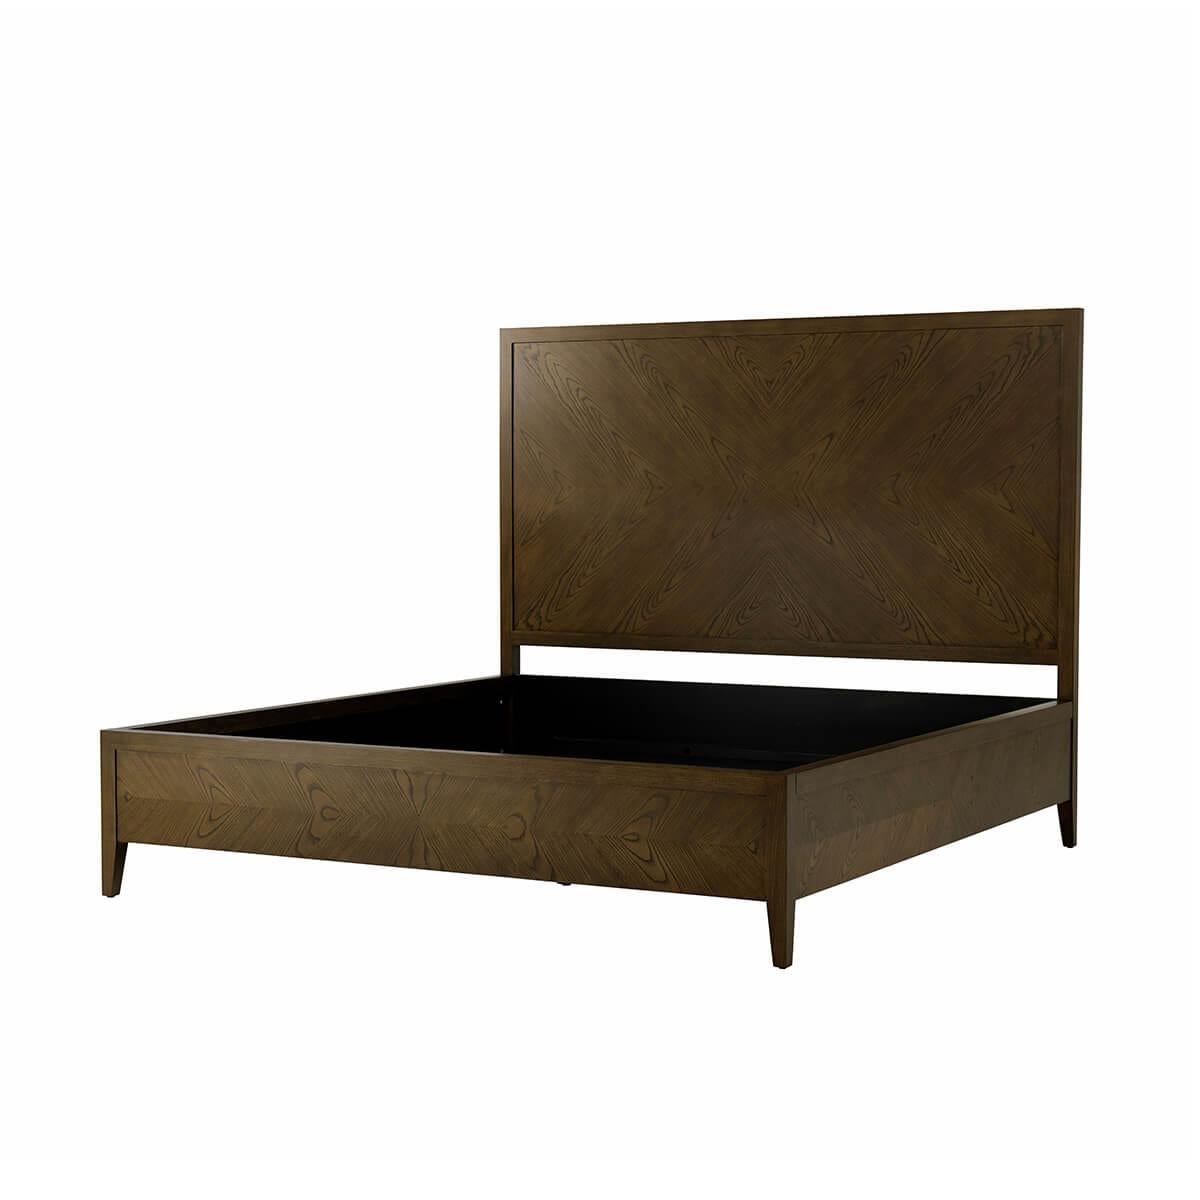 Classic Dark Frame Bed, in our dark earth finish, the undeniable simplicity of the bed frame captures the essence of calm with a classic frame, figured ash 4-way book-matched headboard, and rails with a tapered finished leg.

King dimensions: 81